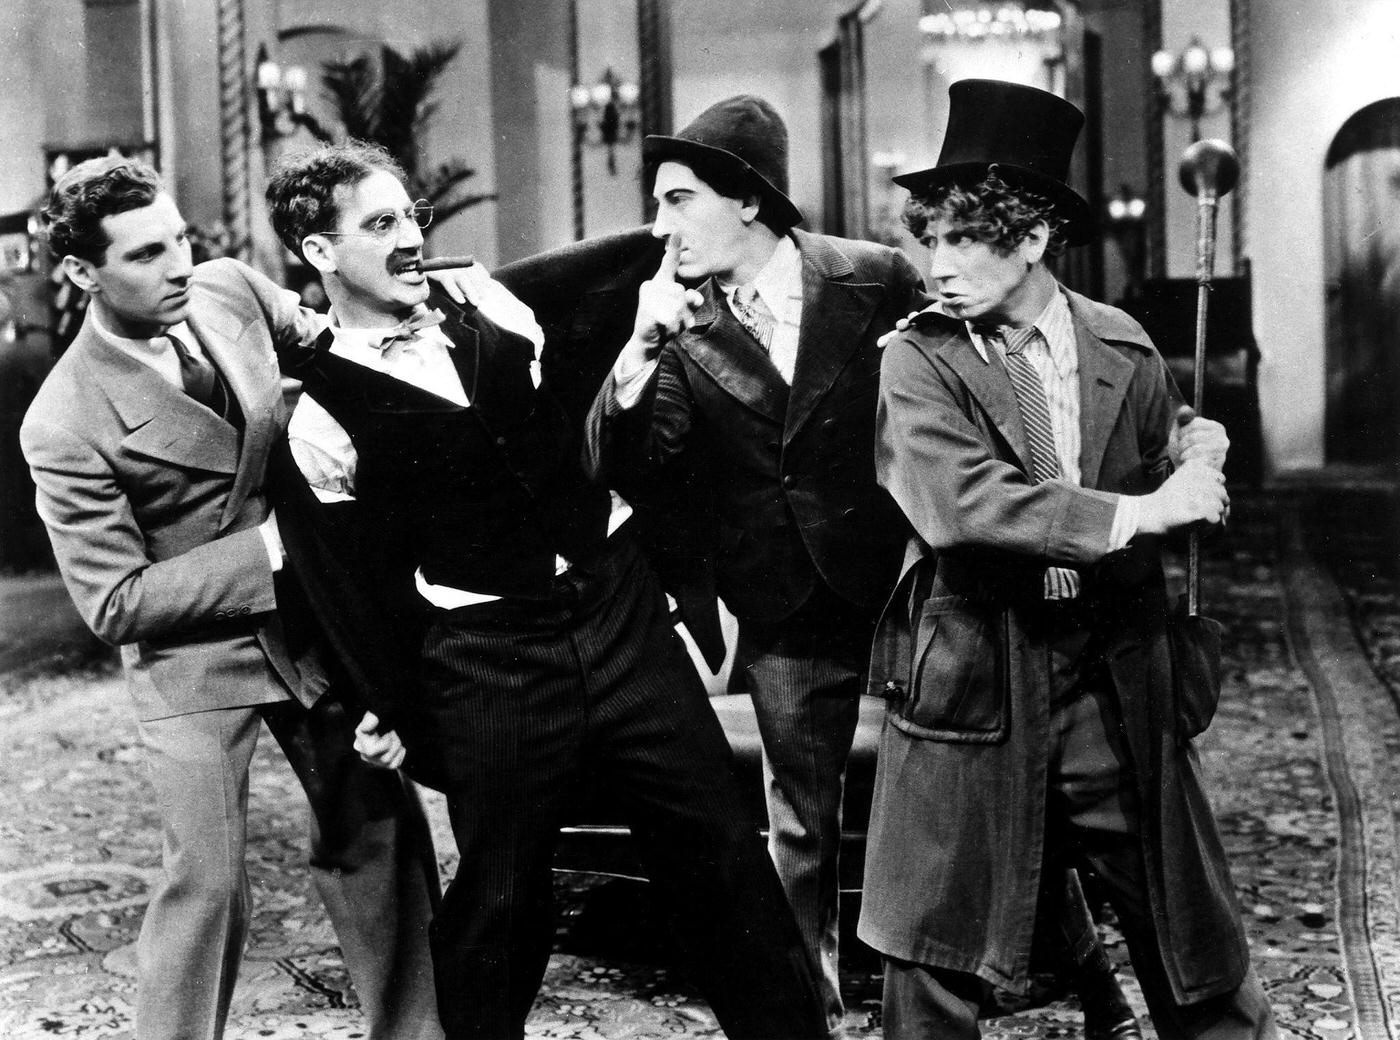 Zeppo, Groucho, Chico, and Harpo Marx in a scene from Duck Soup (1933)